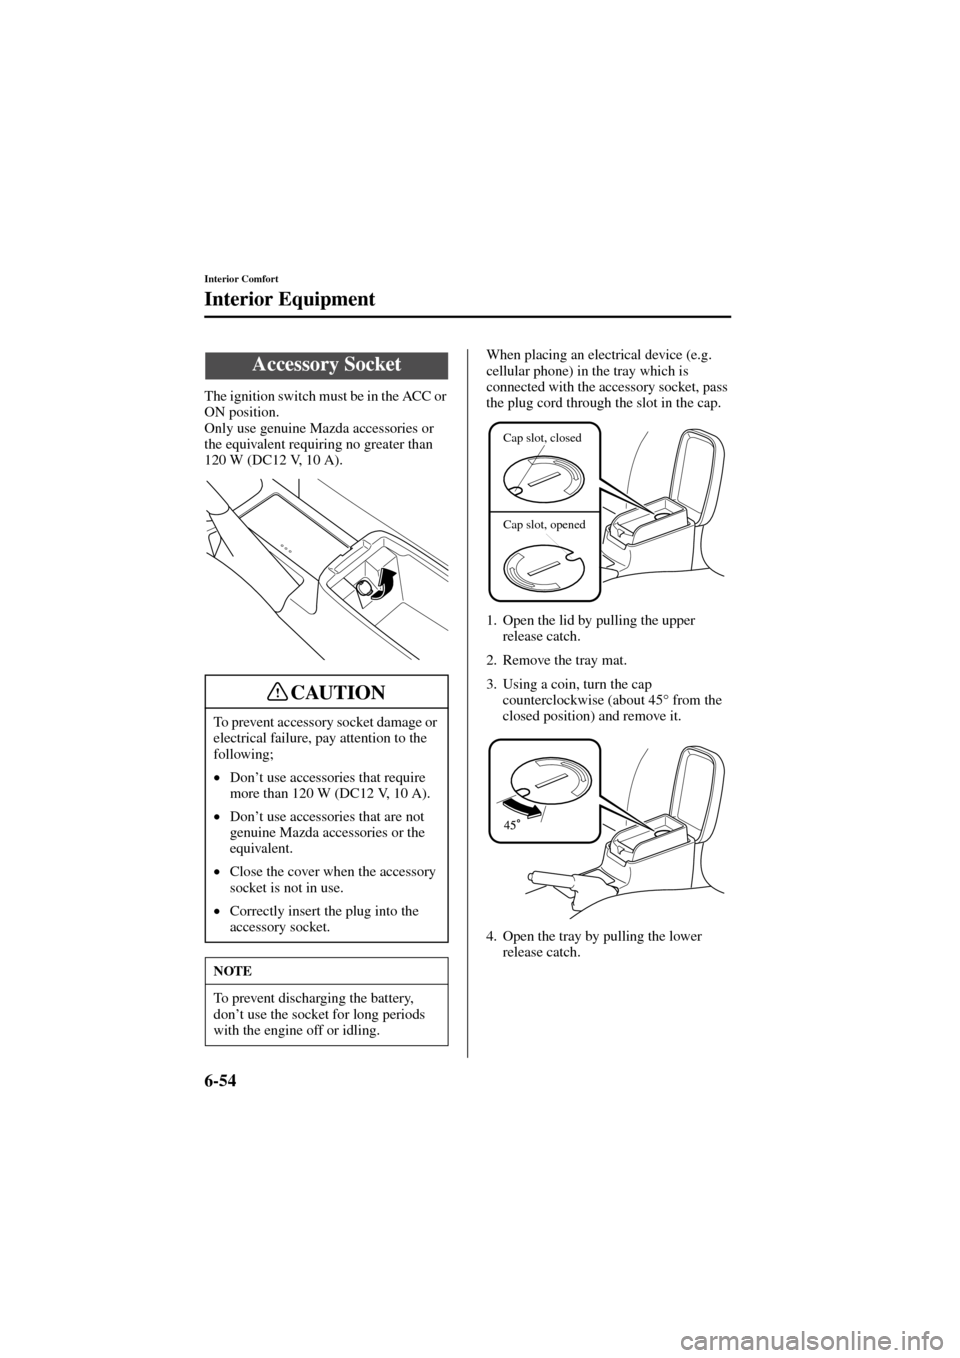 MAZDA MODEL 6 2004  Owners Manual (in English) 6-54
Interior Comfort
Interior Equipment
Form No. 8R29-EA-02I
The ignition switch must be in the ACC or 
ON position.
Only use genuine Mazda accessories or 
the equivalent requiring no greater than 
1